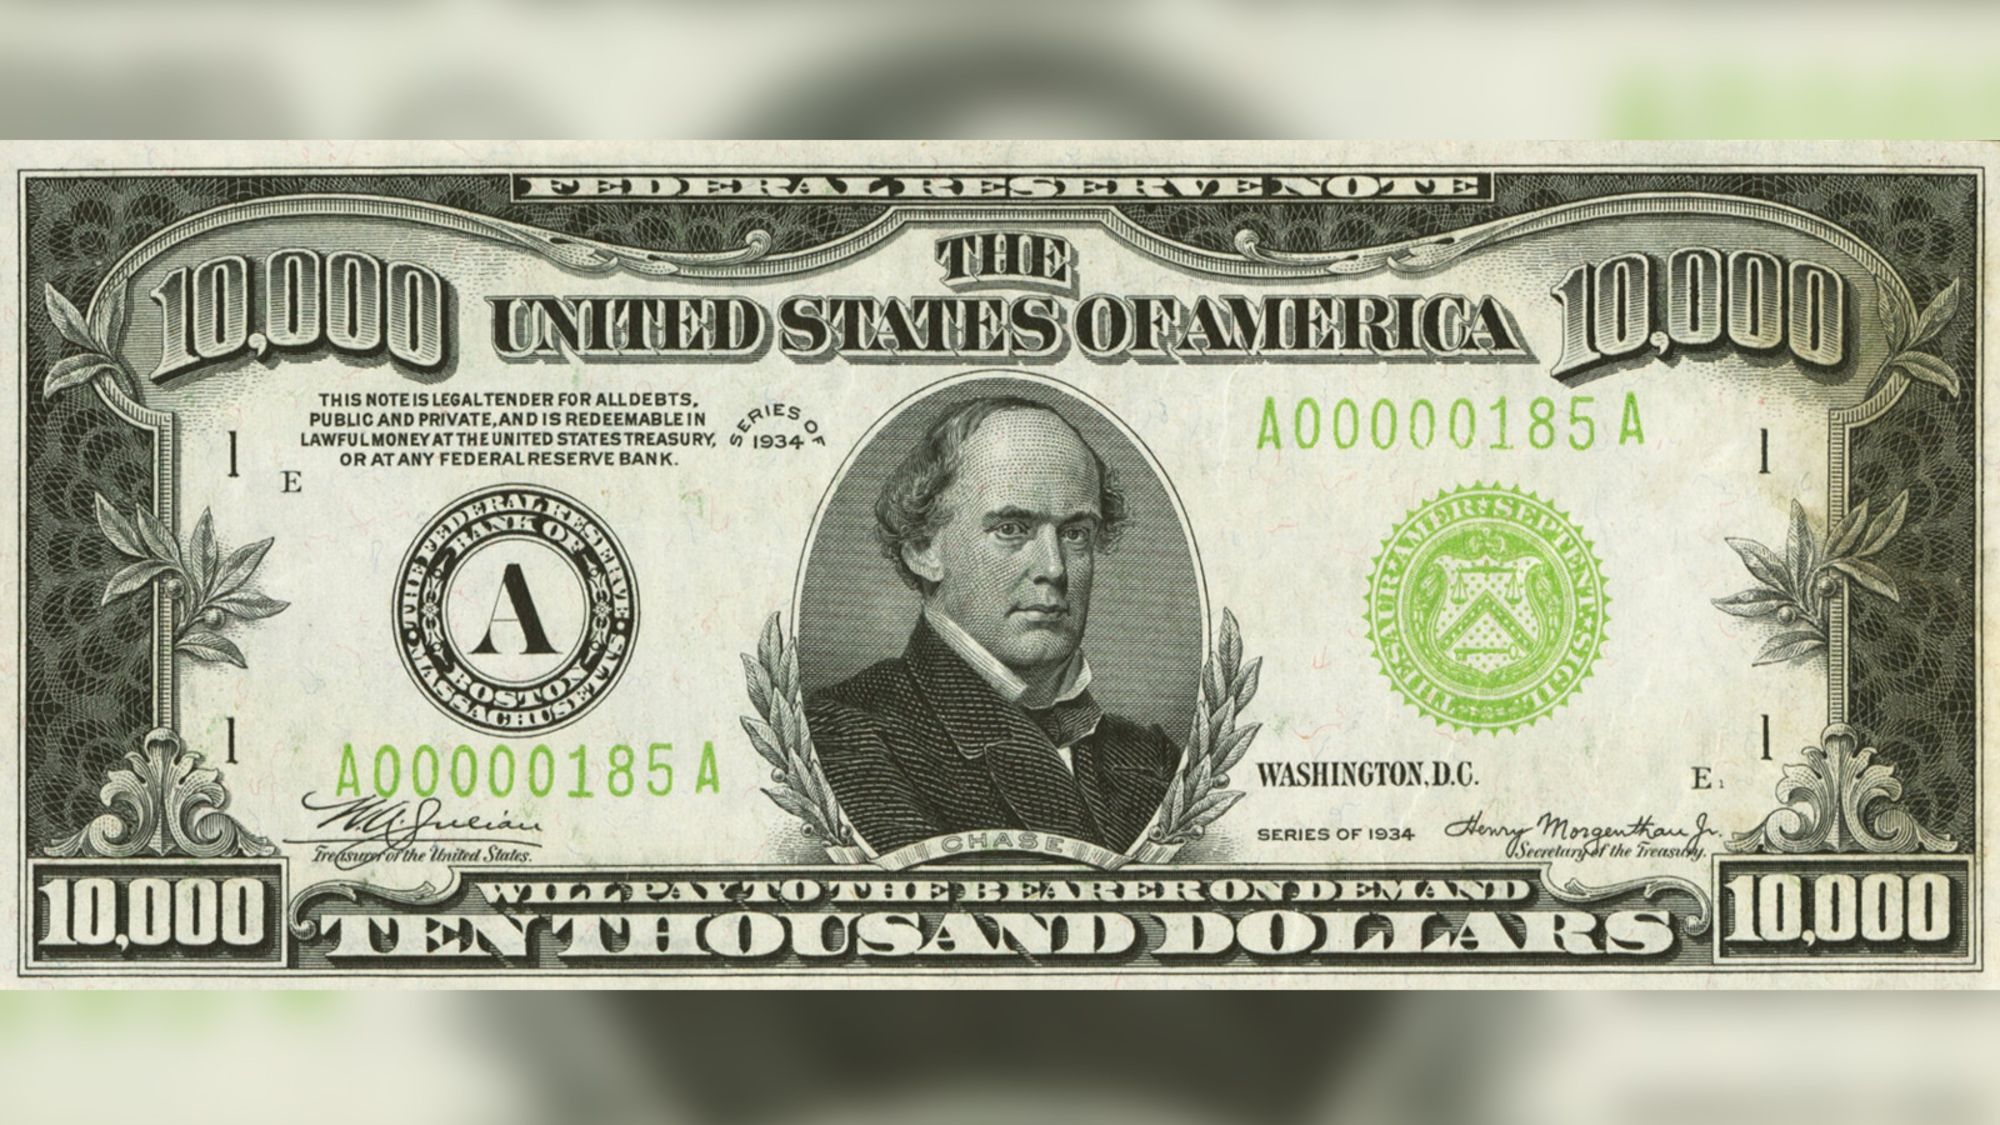 $10,000 bill from Great Depression era sells for $480,000 at auction